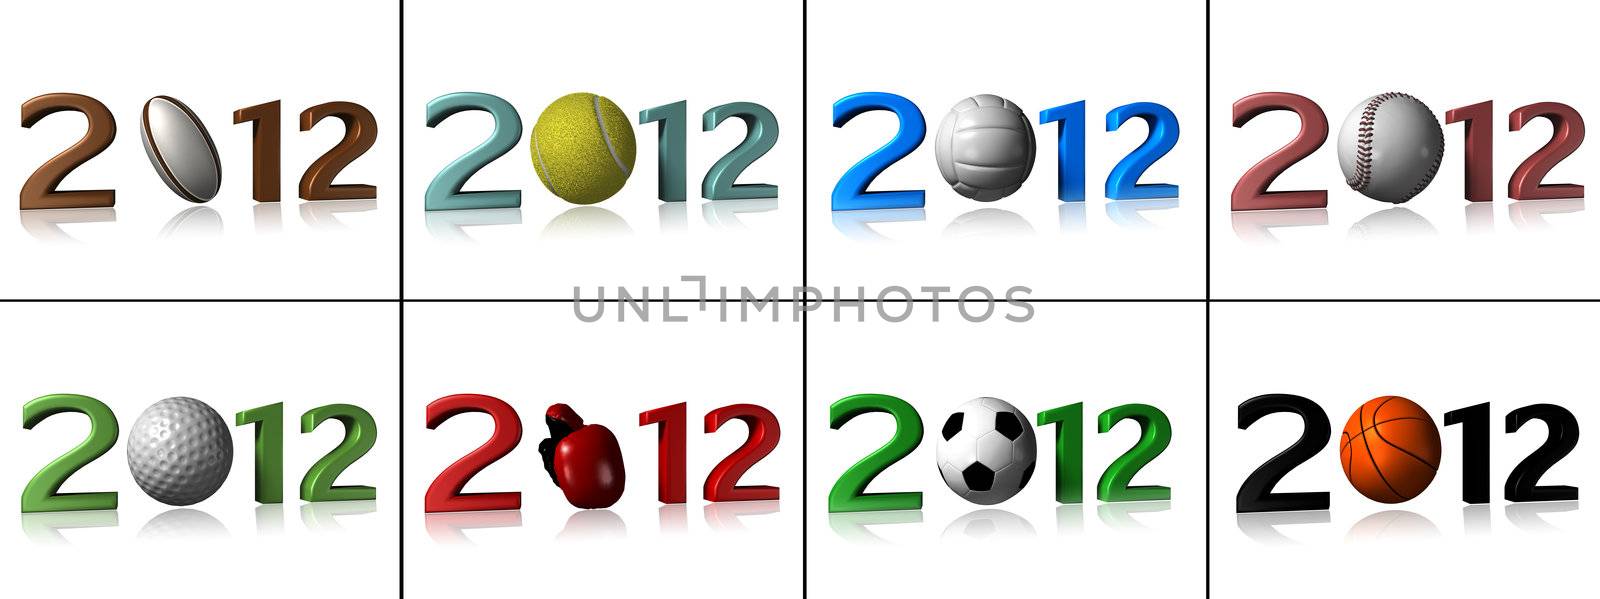 Eight 2012 sport designs on white background by shkyo30